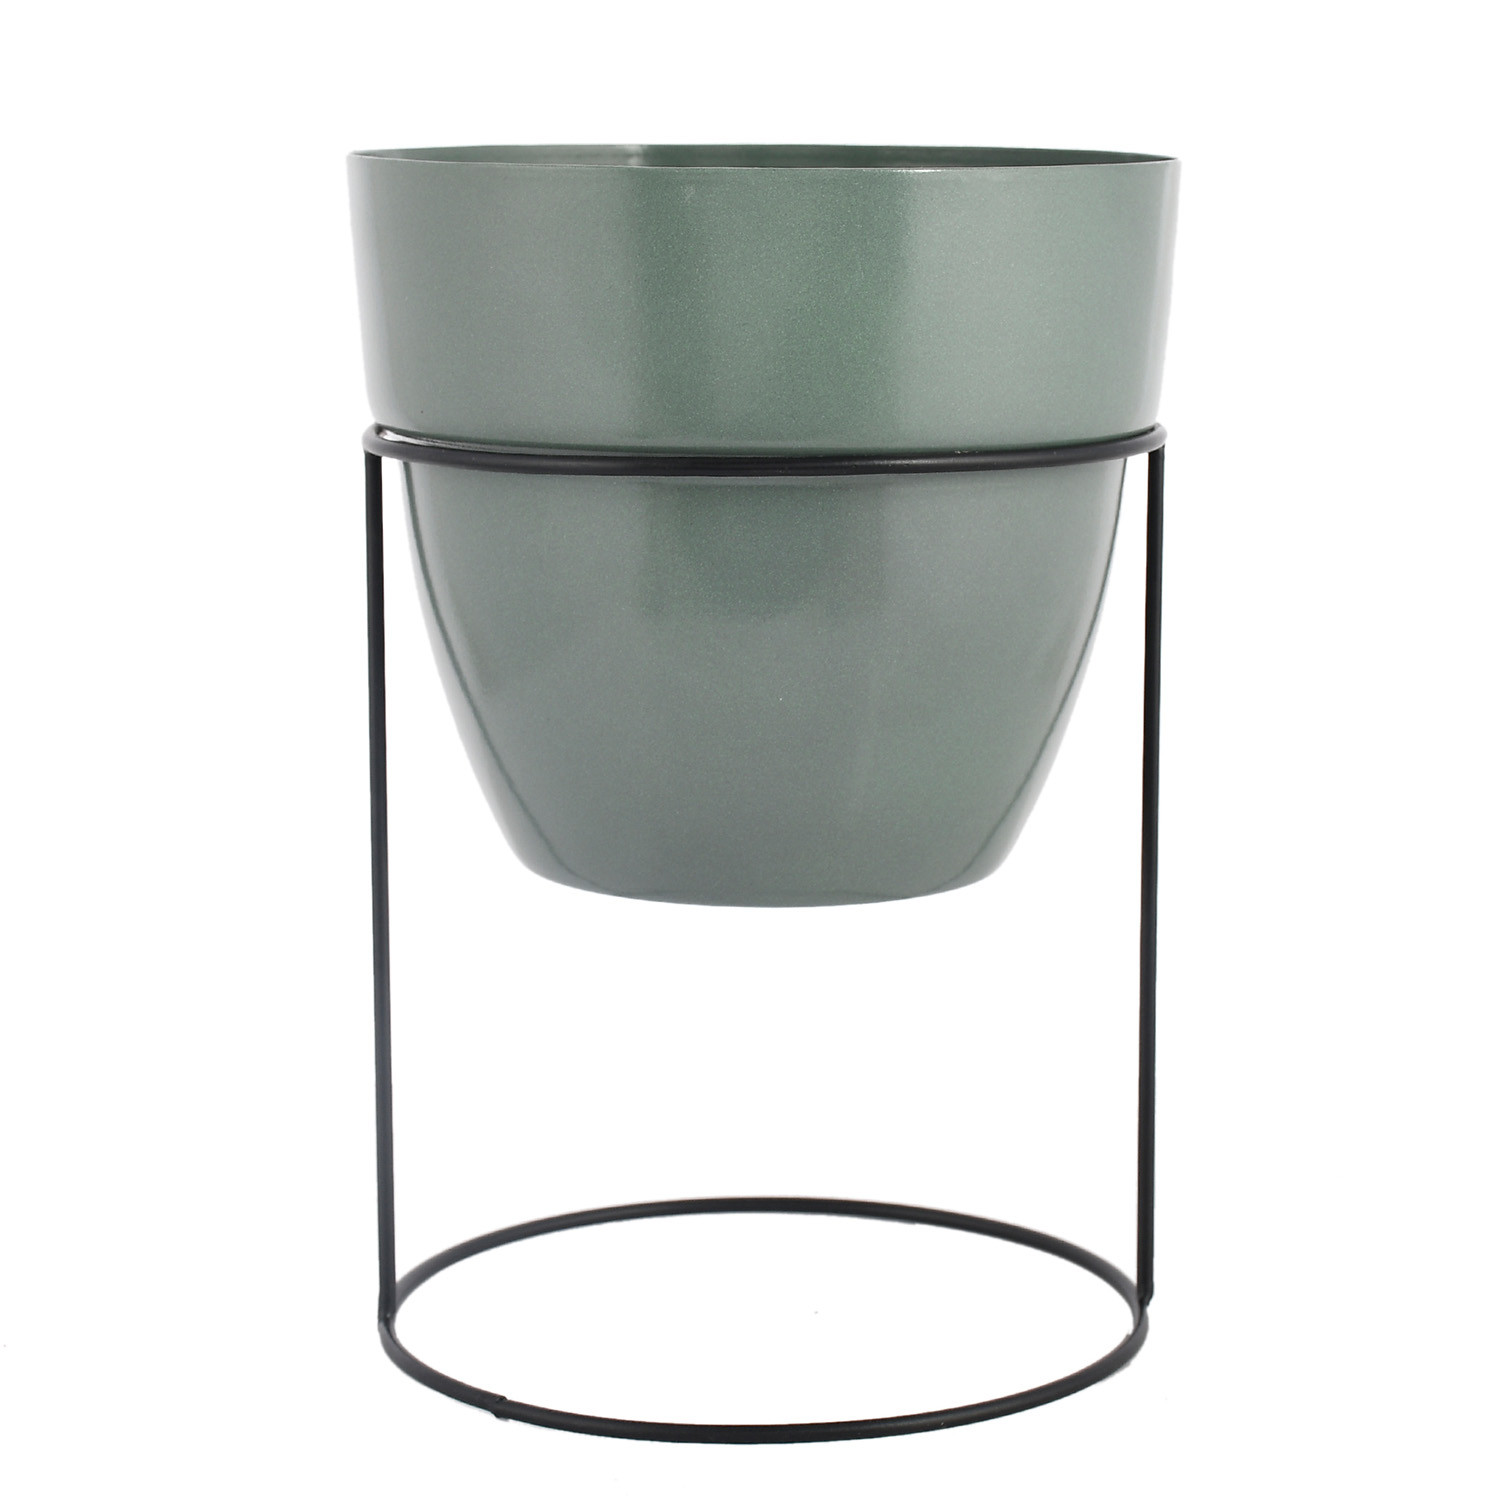 Kuber Industries Metal Planter|Decorative Modern Indoor Desk Pot|Iron Table Stand Flower Planter Pot For Home Décor,8.5 Inches,Pack of 2 (Green & Terracotta)